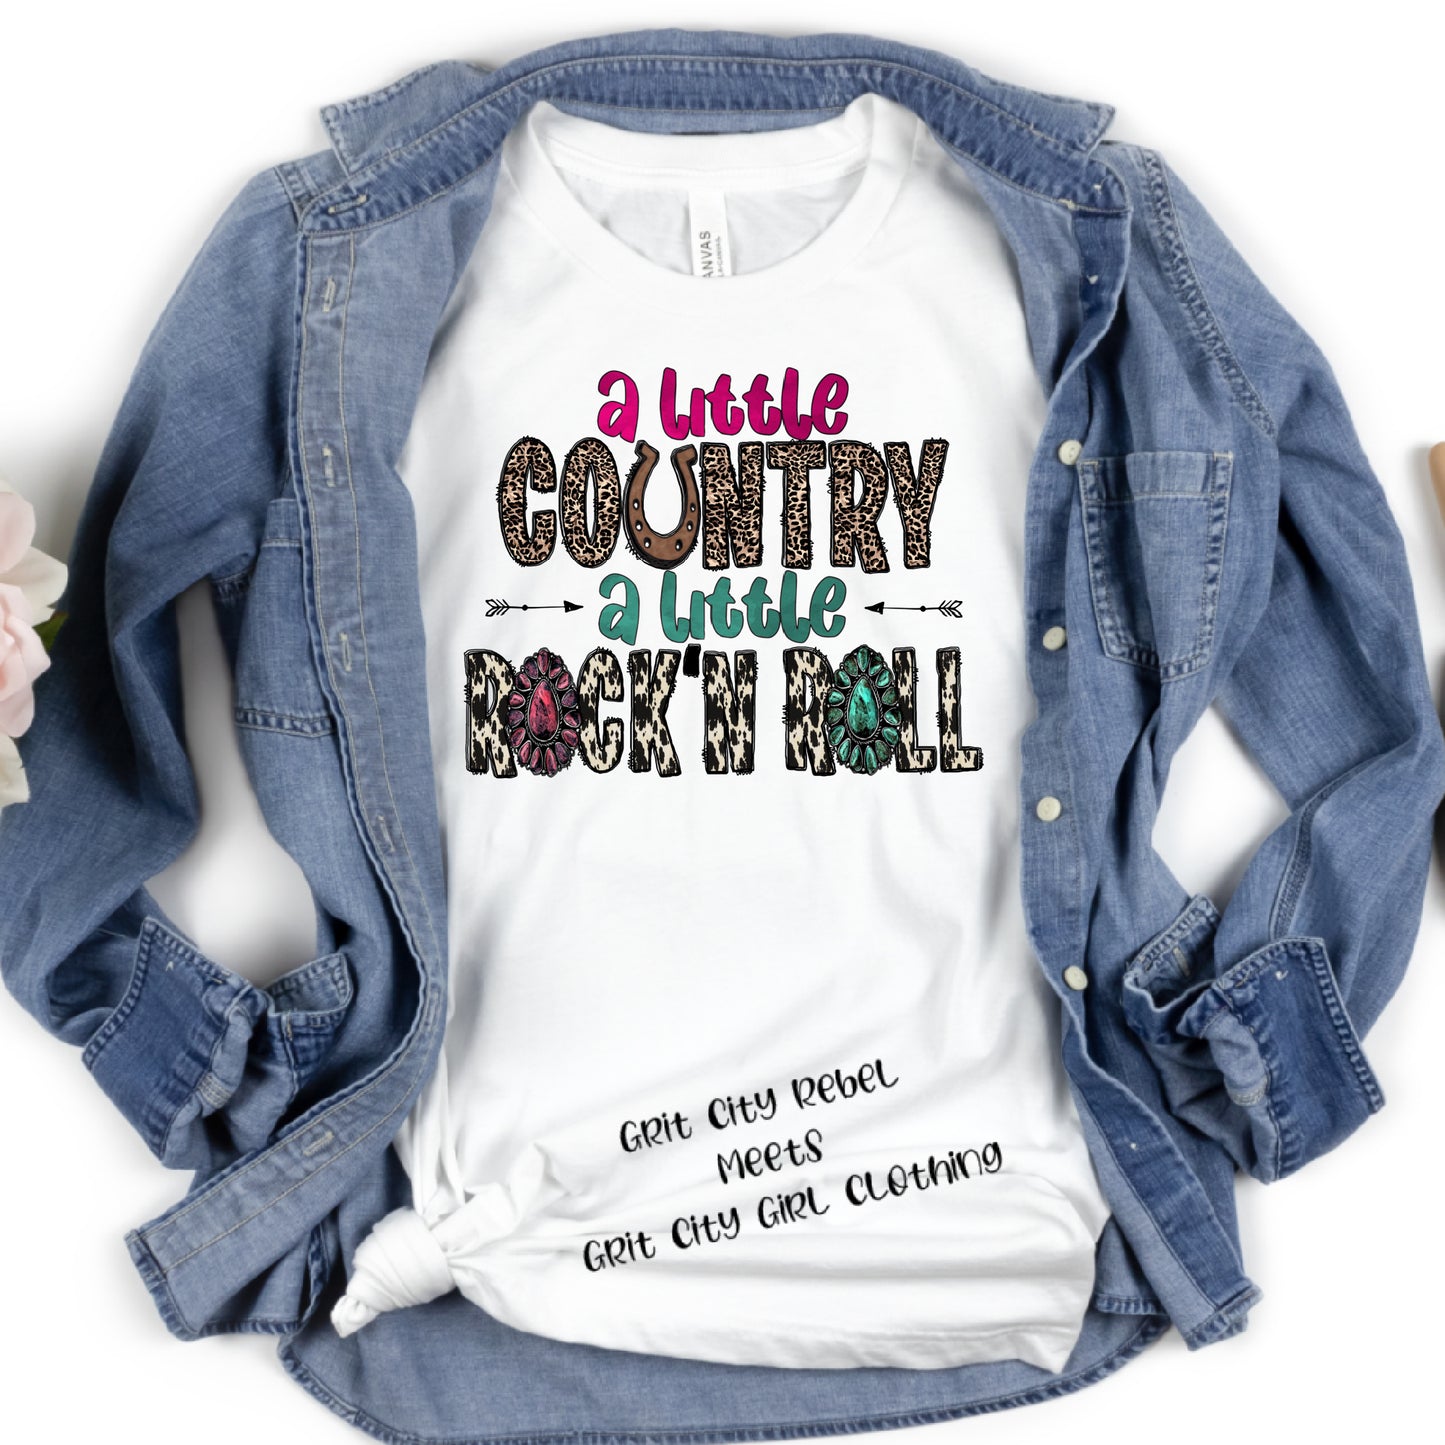 A little Country A little Rock and Roll unisex short sleeve unisex Tshirt in a colorful writing of mixed faux textures